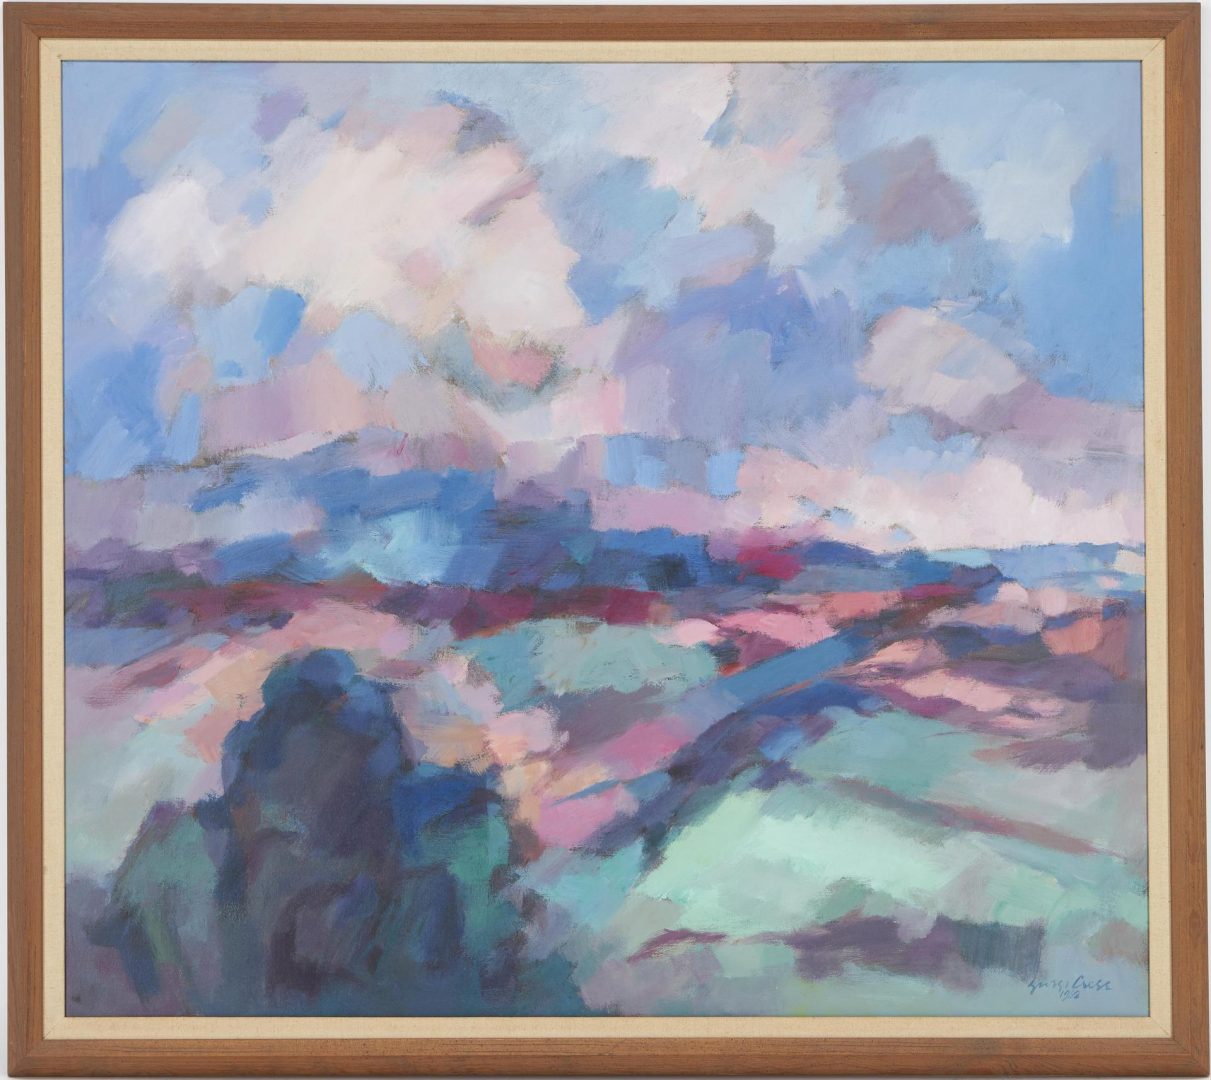 Lot 224: Large George Cress O/C Abstract Landscape Painting